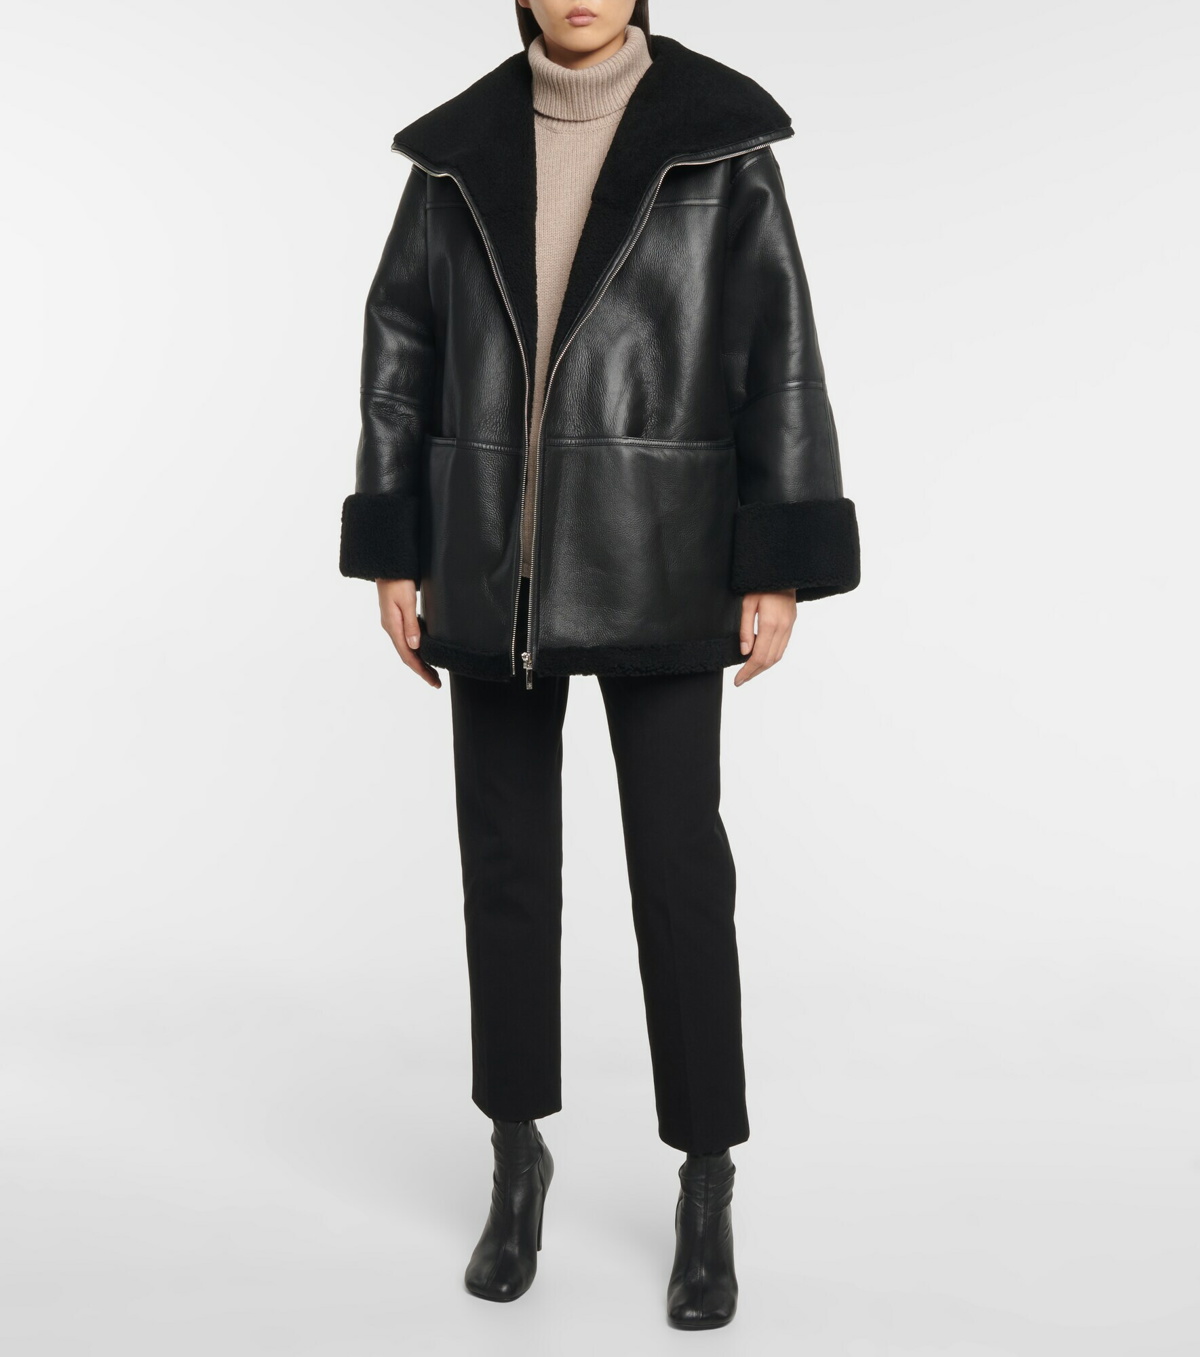 Toteme - Shearling-lined leather jacket Toteme